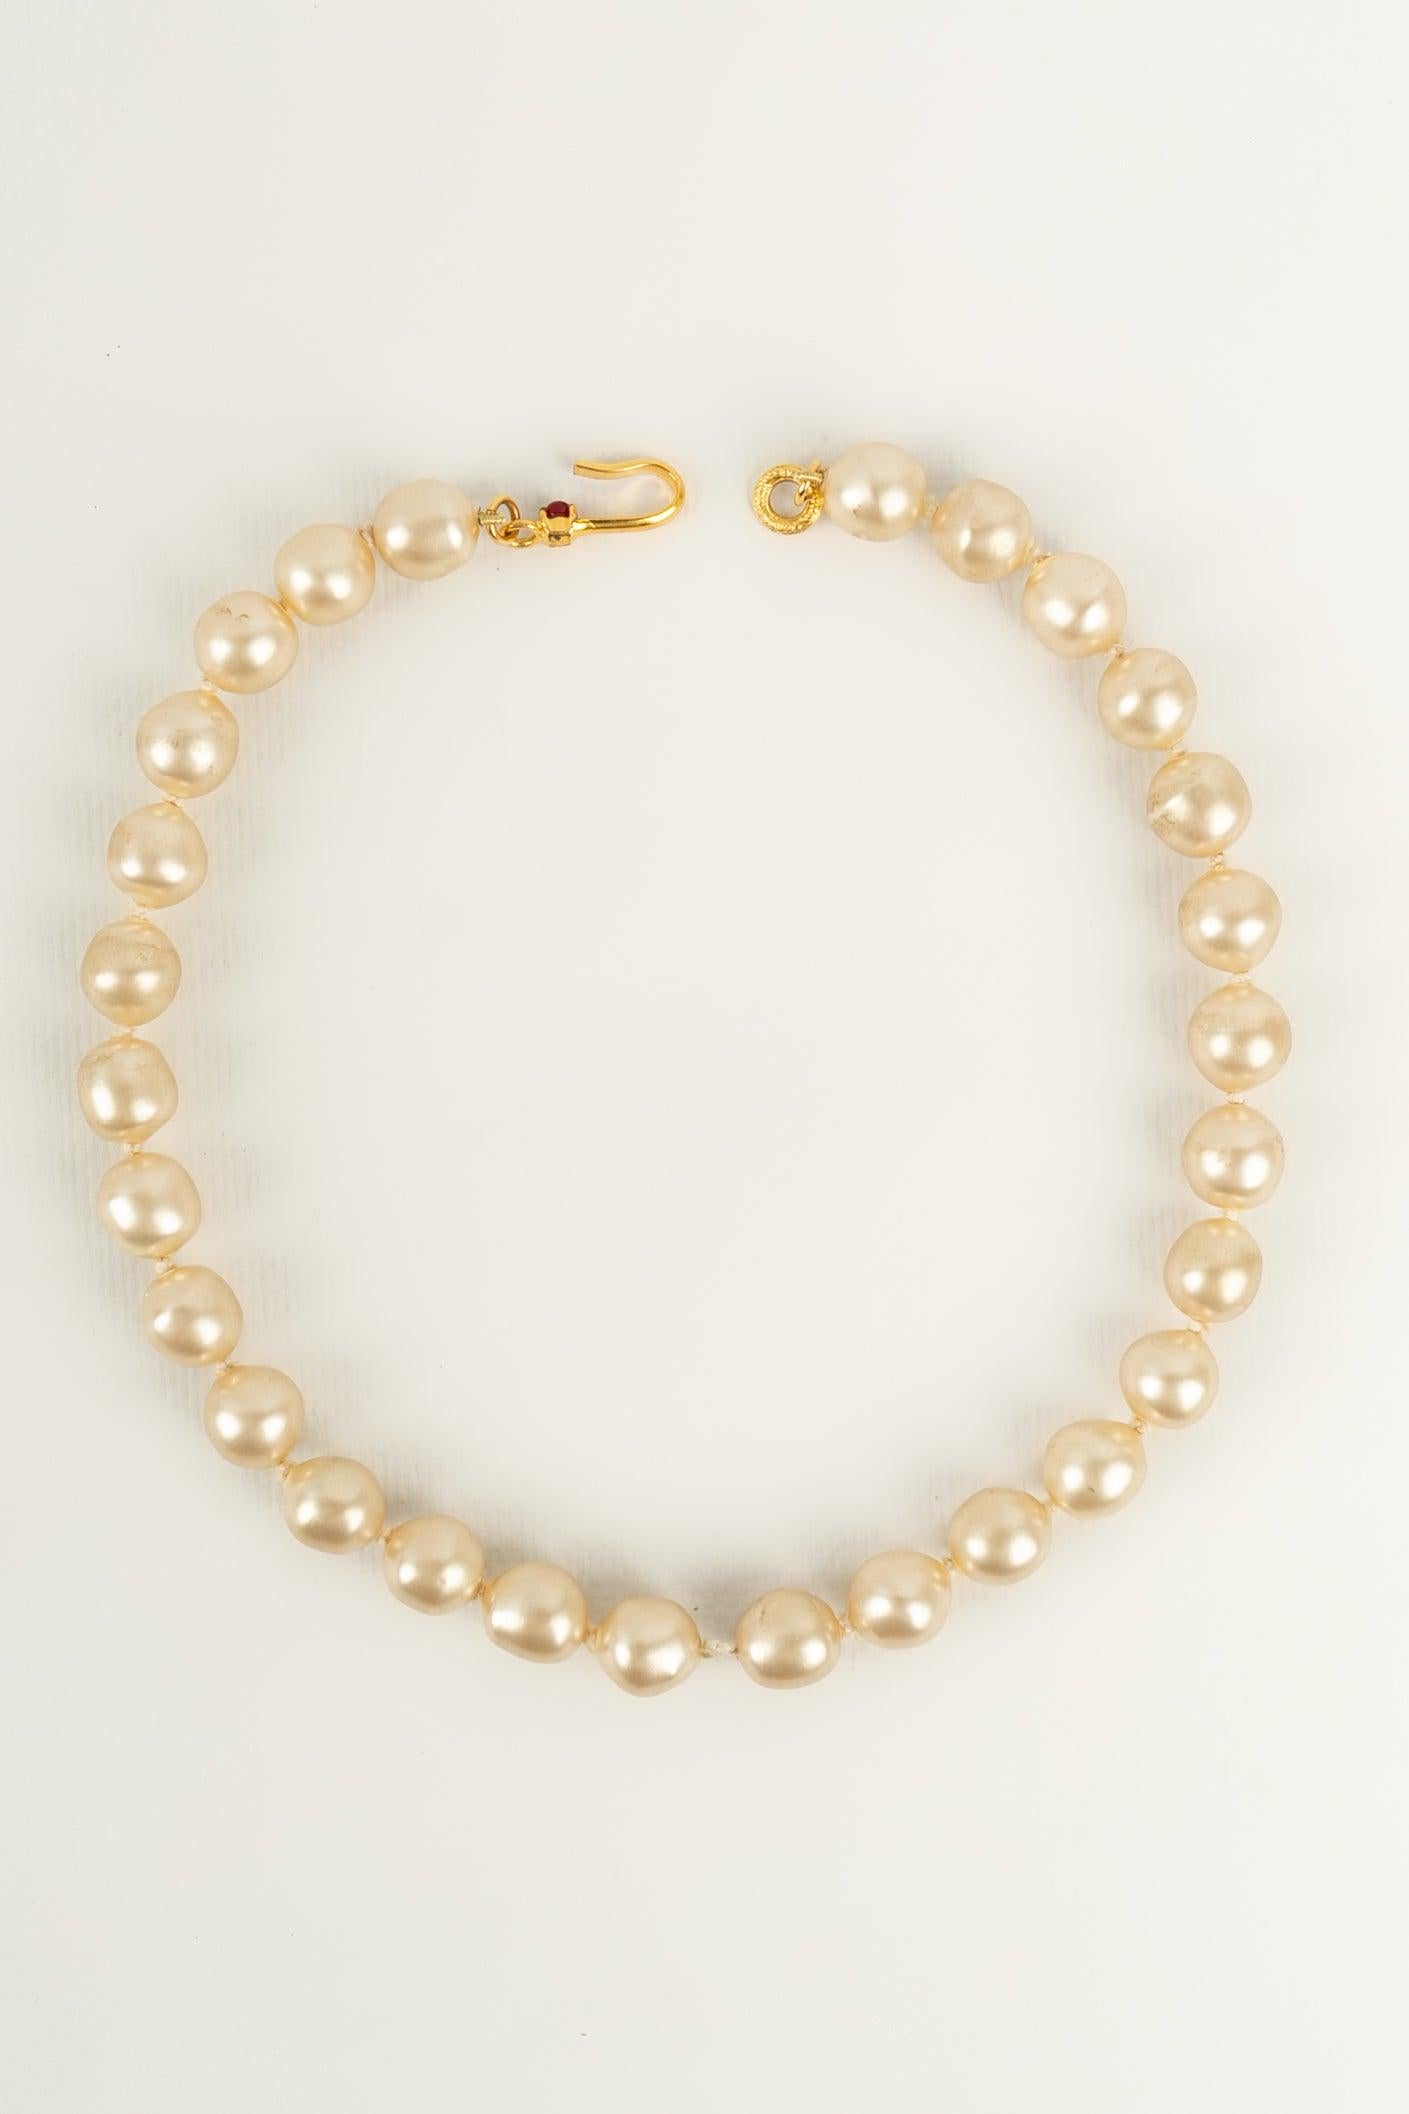 Chanel (Made in France) Necklace in costume pearly beads with a medallion in gold-plated metal and glass paste. Fall-Winter 1996 Collection.

Additional Information:
Condition: Very good condition
Dimensions: Length: 44 cm - Pendant: 7 cm
Period: